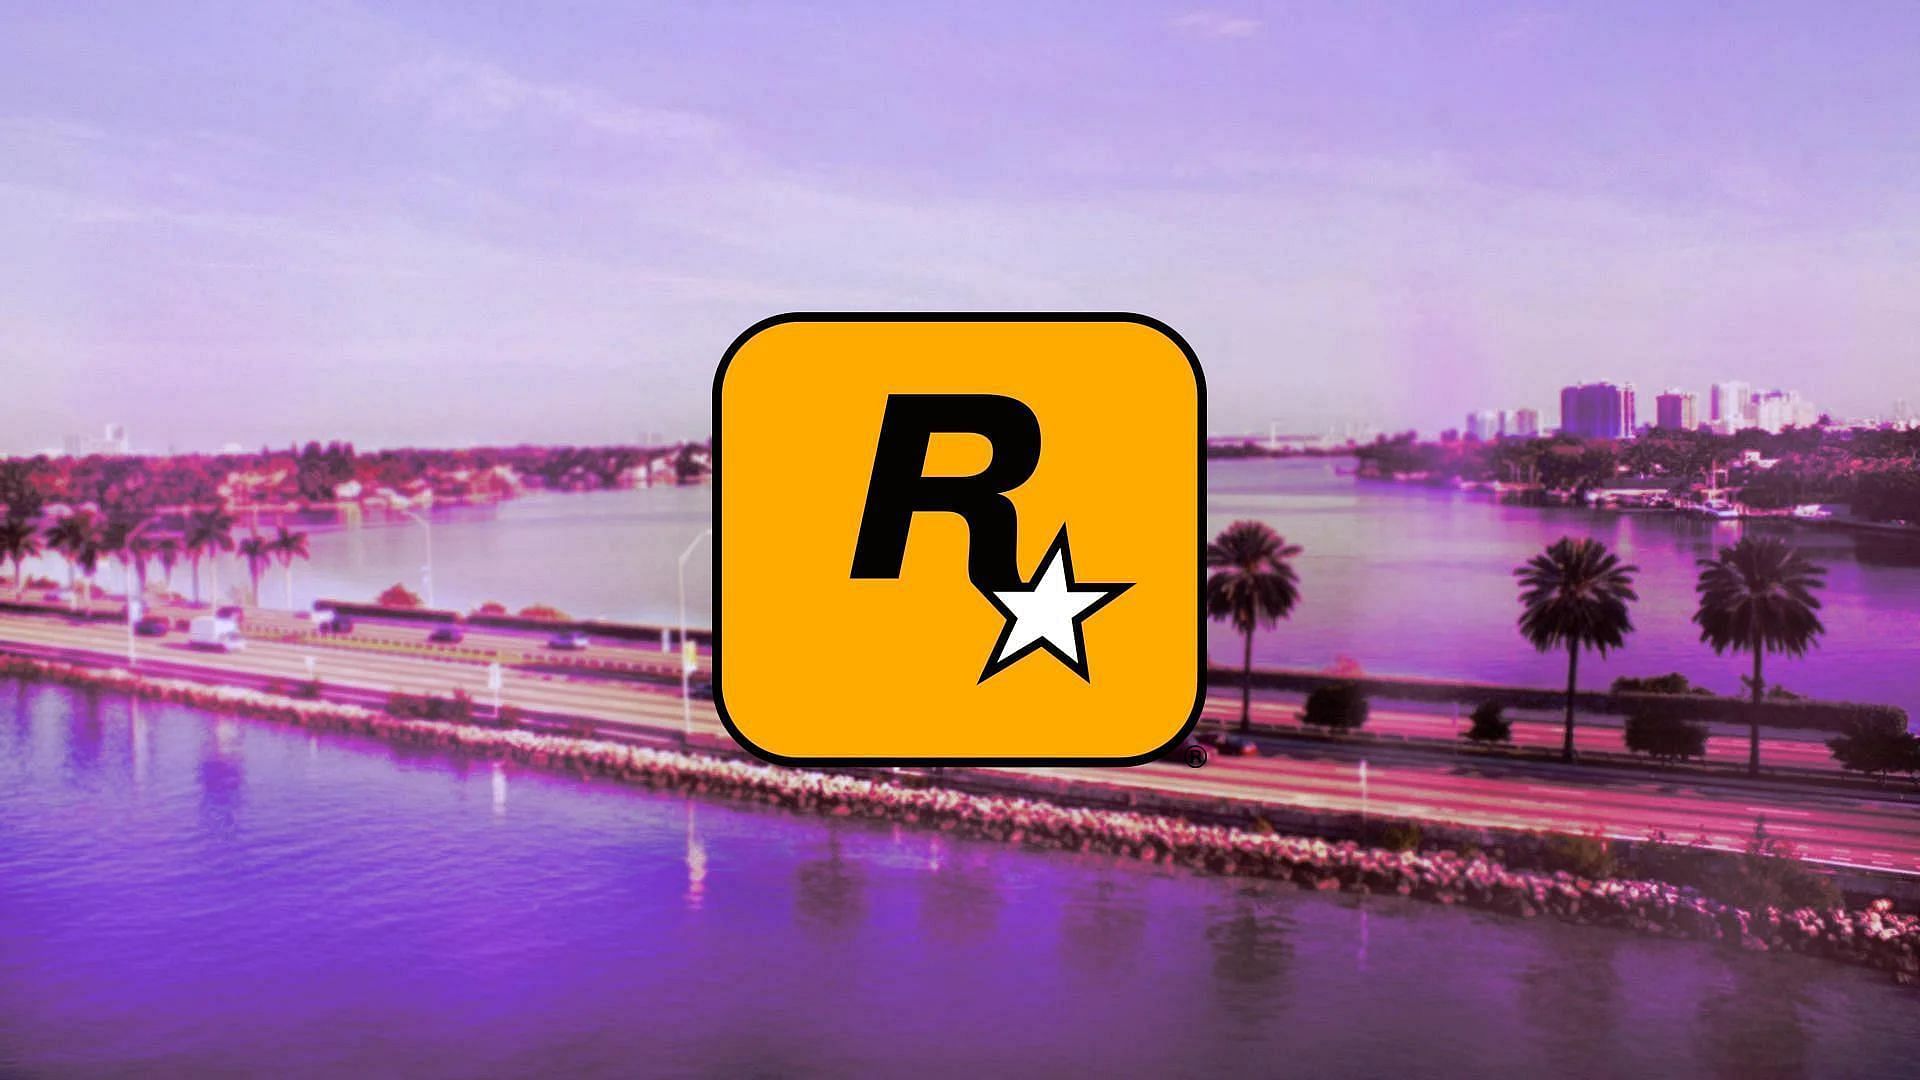 Rockstar Games is working hard on the title (Image via Rockstar Games)